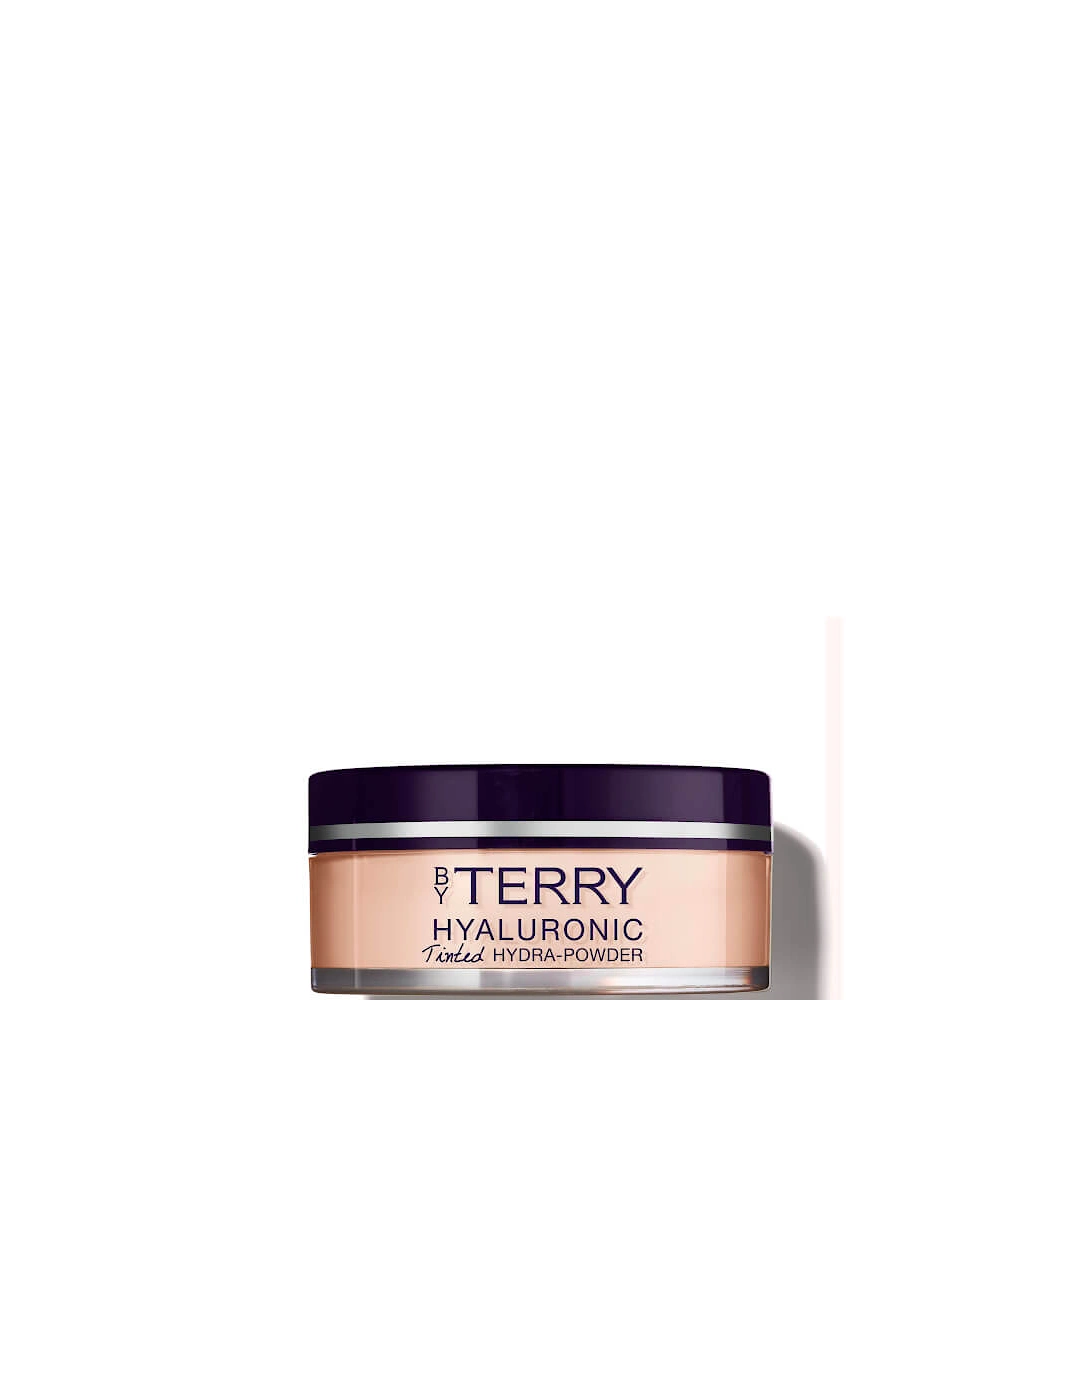 By Terry Hyaluronic Tinted Hydra-Powder - N100. Fair, 2 of 1